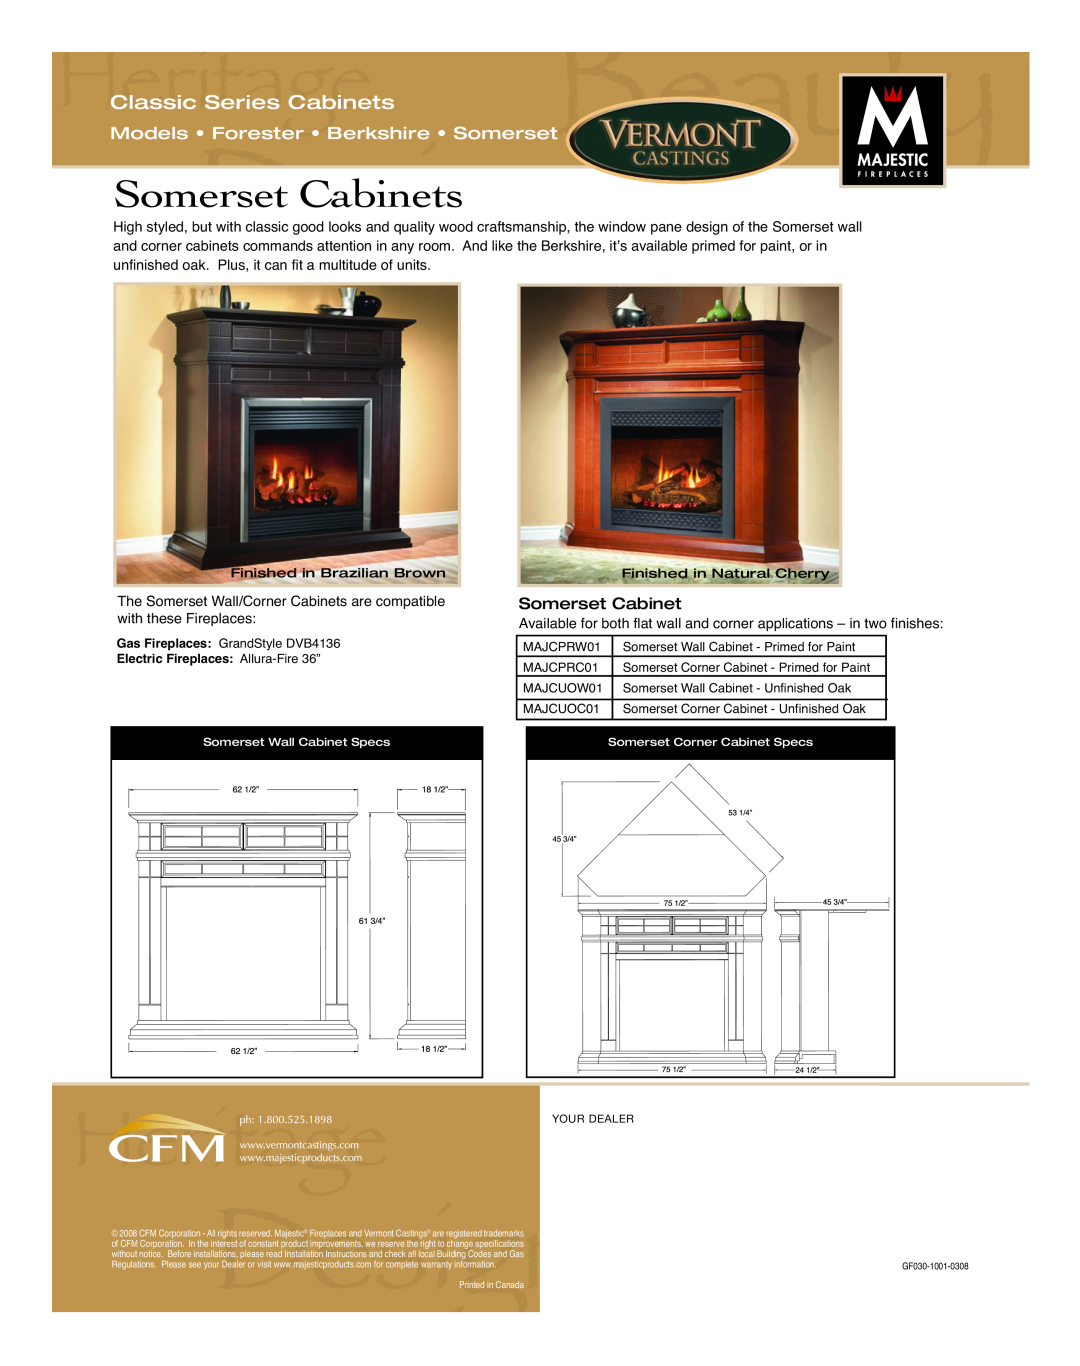 Vermont Casting manual Somerset Cabinets, Classic Series Cabinets, Models Forester Berkshire Somerset 